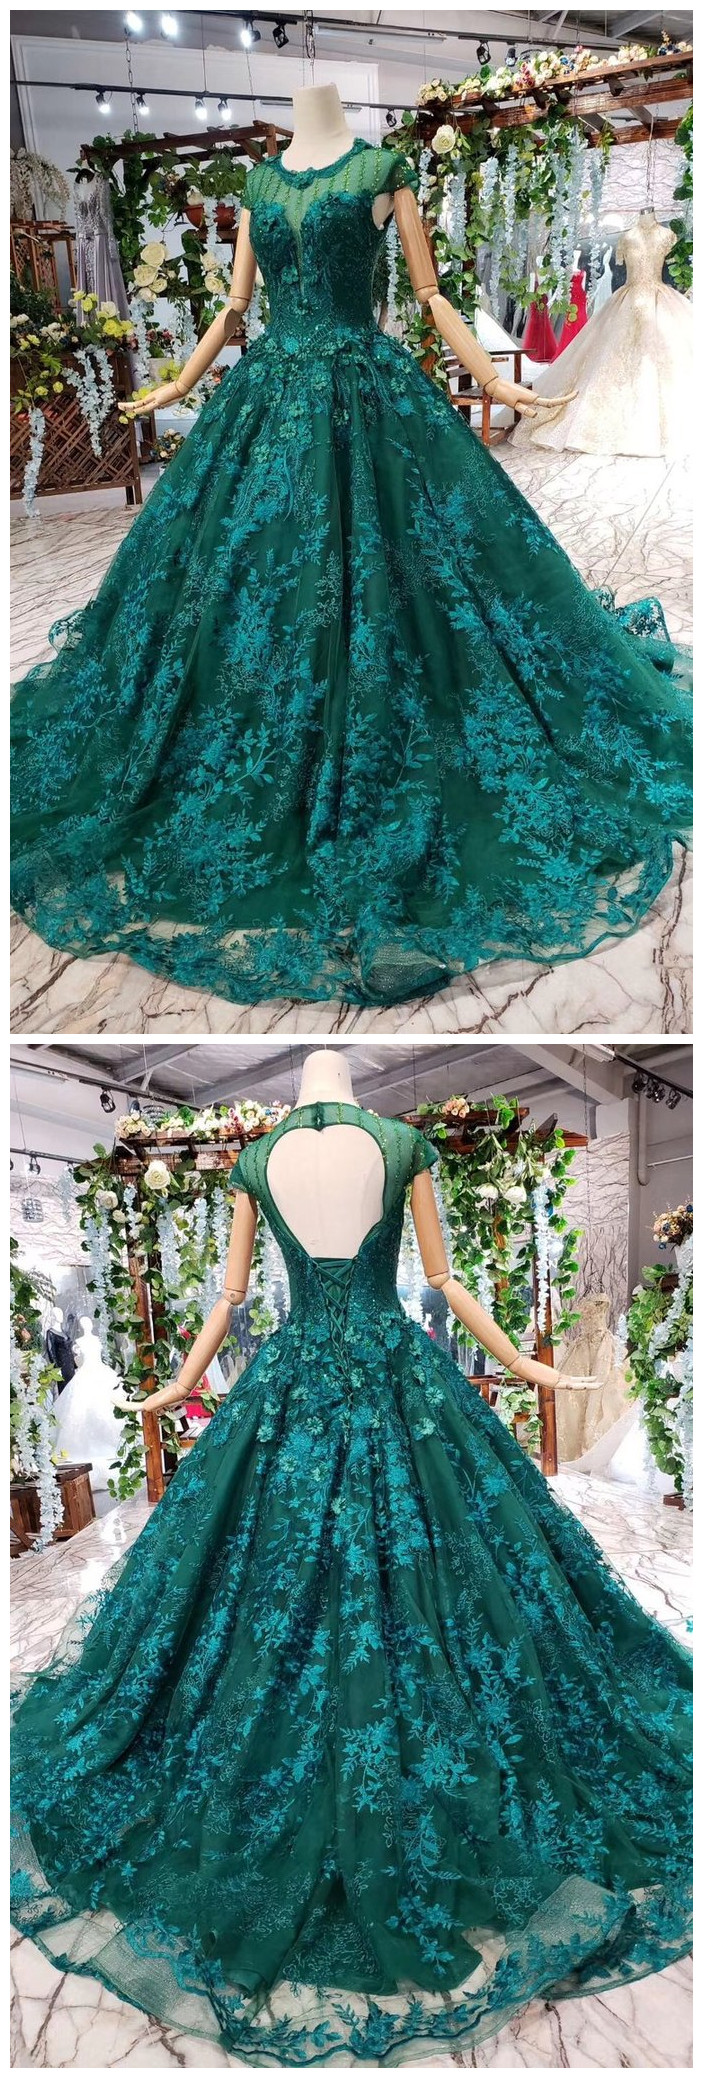 Dark Green Lace Ball Gown Prom Dress With Beads, Quinceanera Dress With Flowers